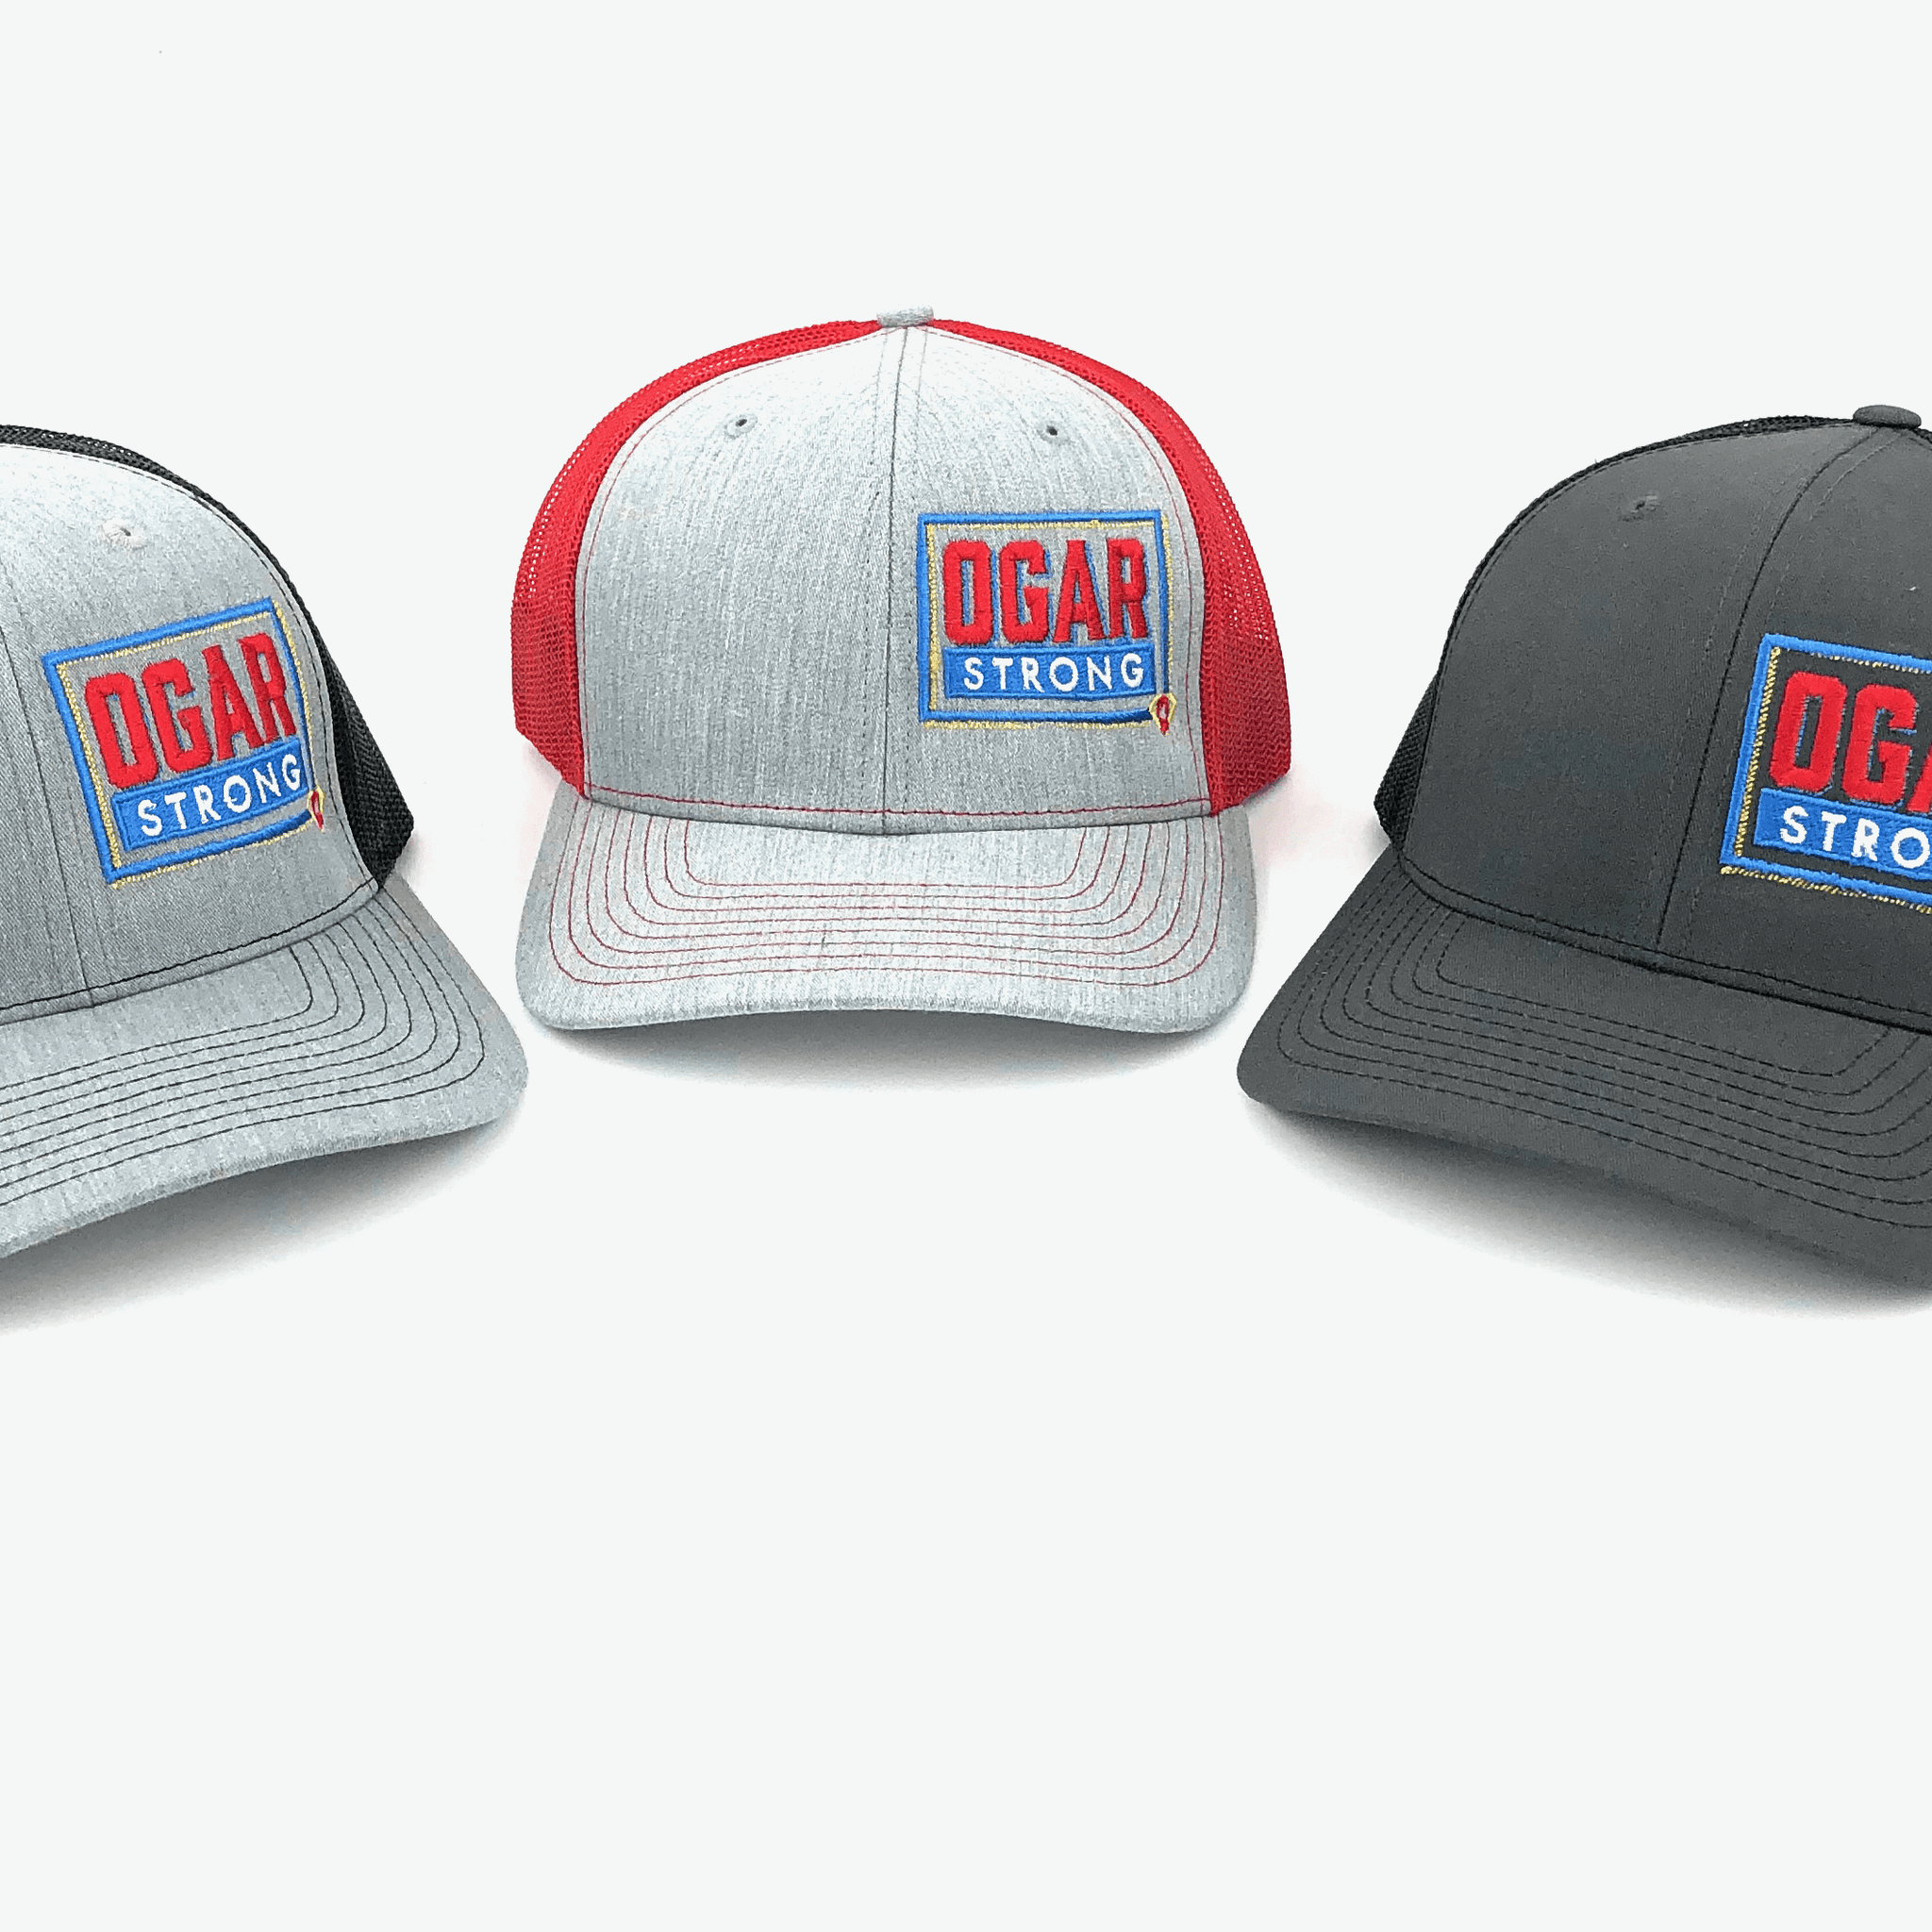 Three mesh style trucker hats in black mesh - grey front panel, red mesh - grey front panel and black mesh and black front panel all have the Ogar Strong Logo embroidered on the front left panel